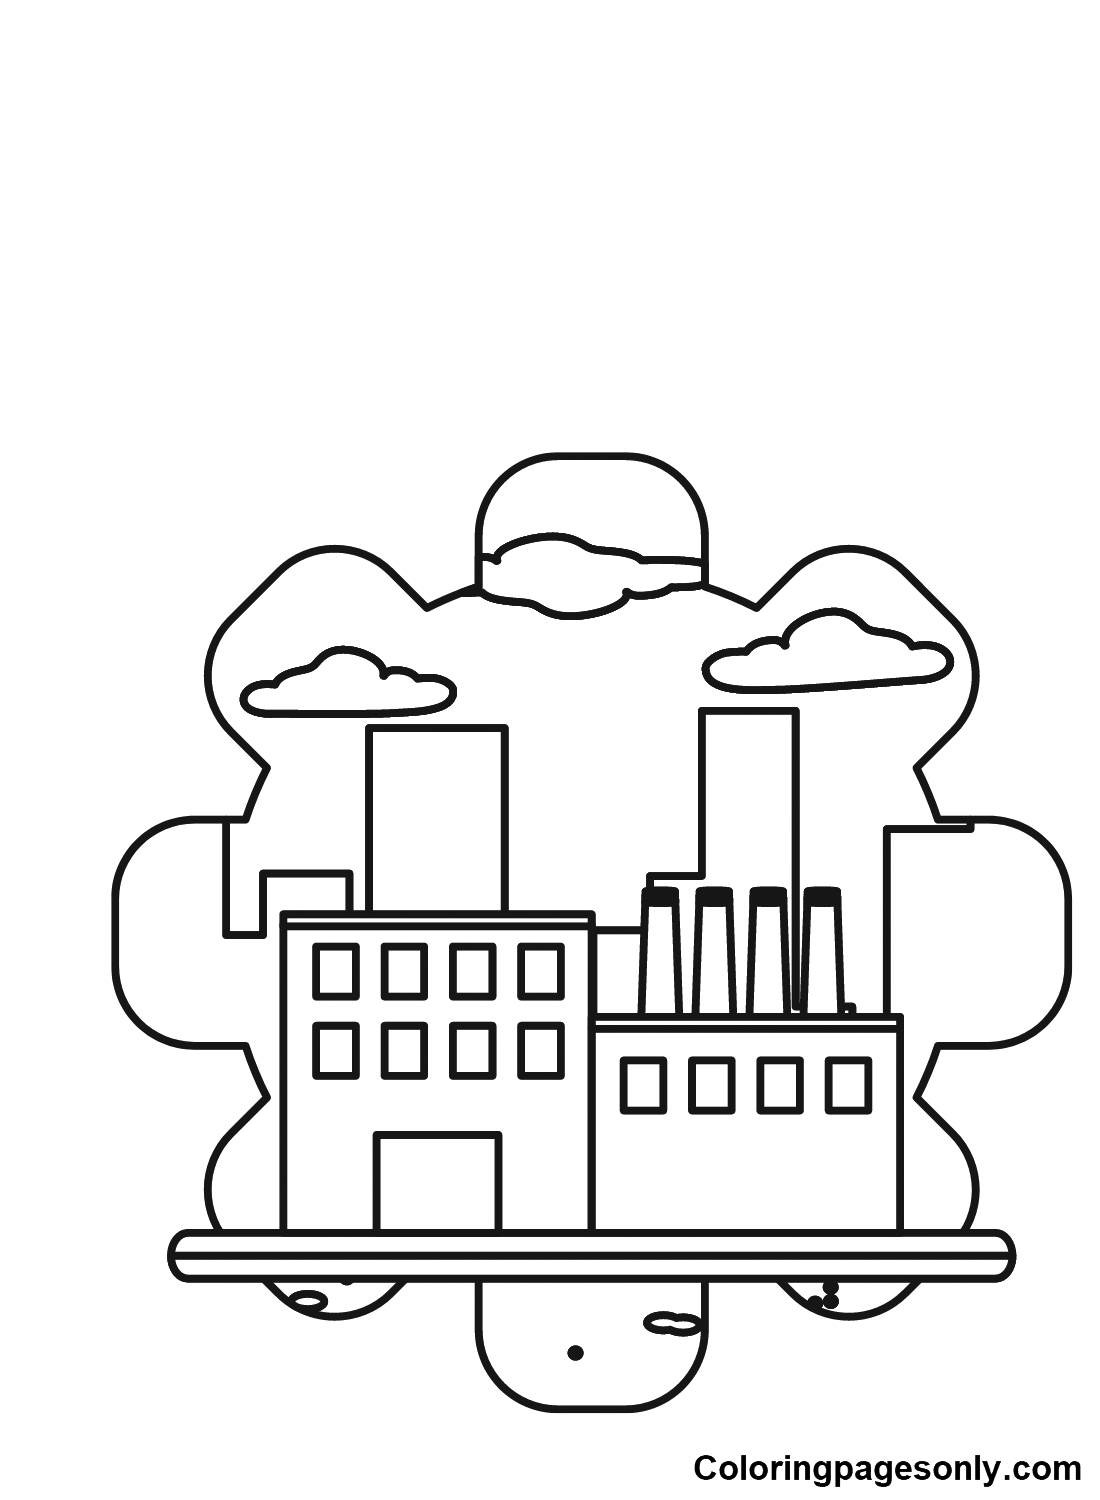 Free Factory Coloring Page